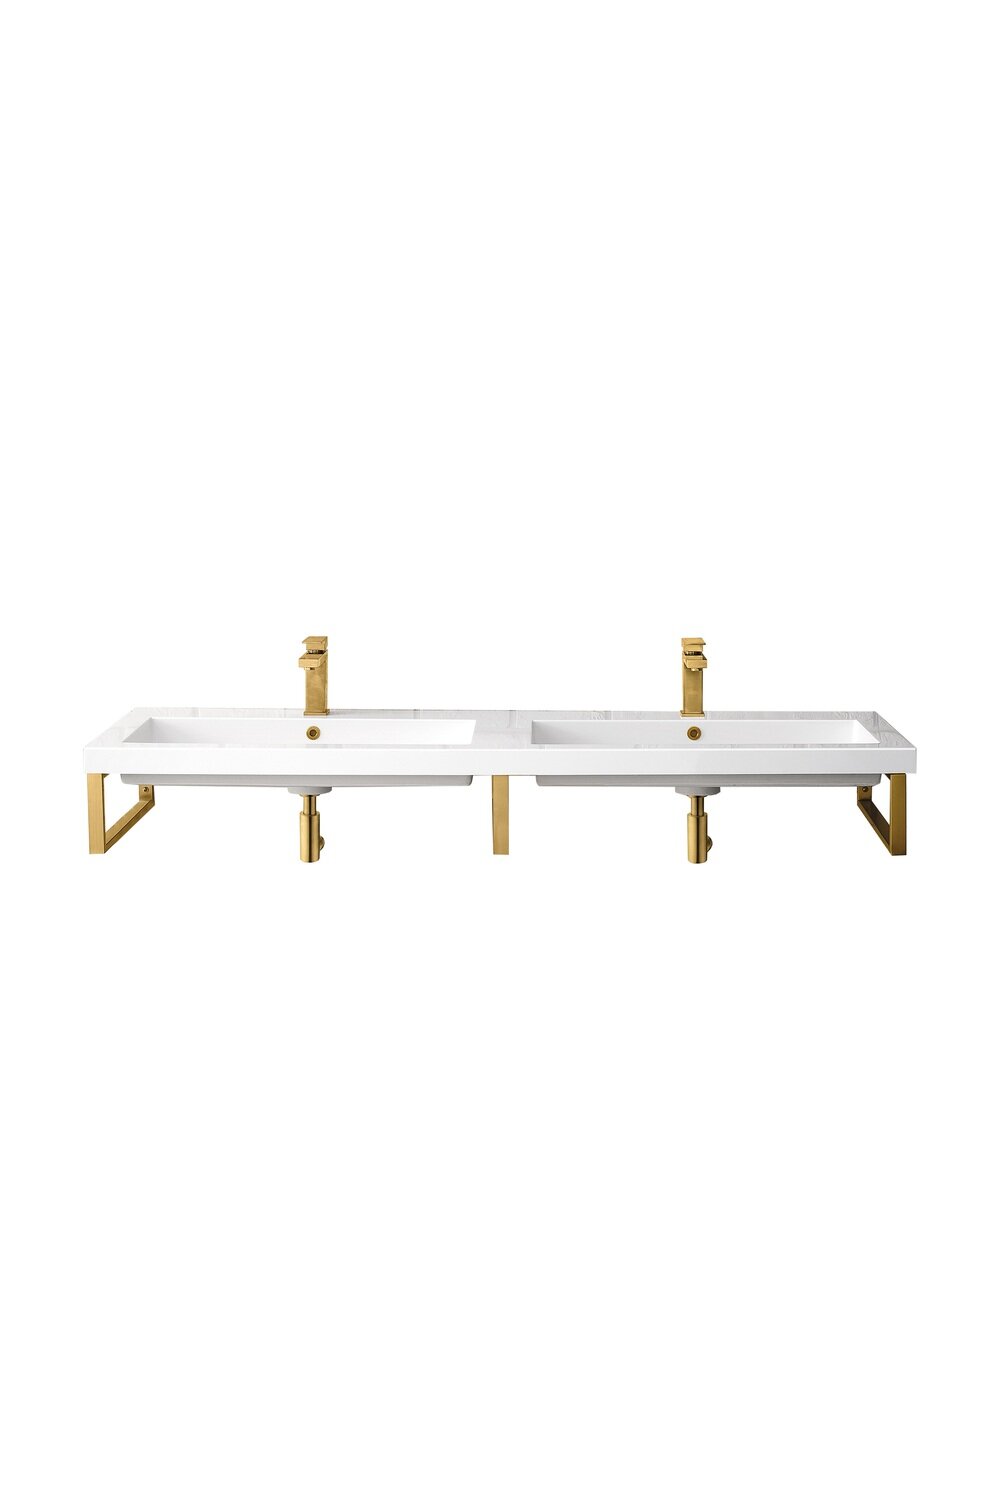 JAMES MARTIN - Three Boston 18&quot; Wall Brackets, Radiant Gold w/ 63&quot; White Glossy Composite Stone Top 055BK18RGD63WG2